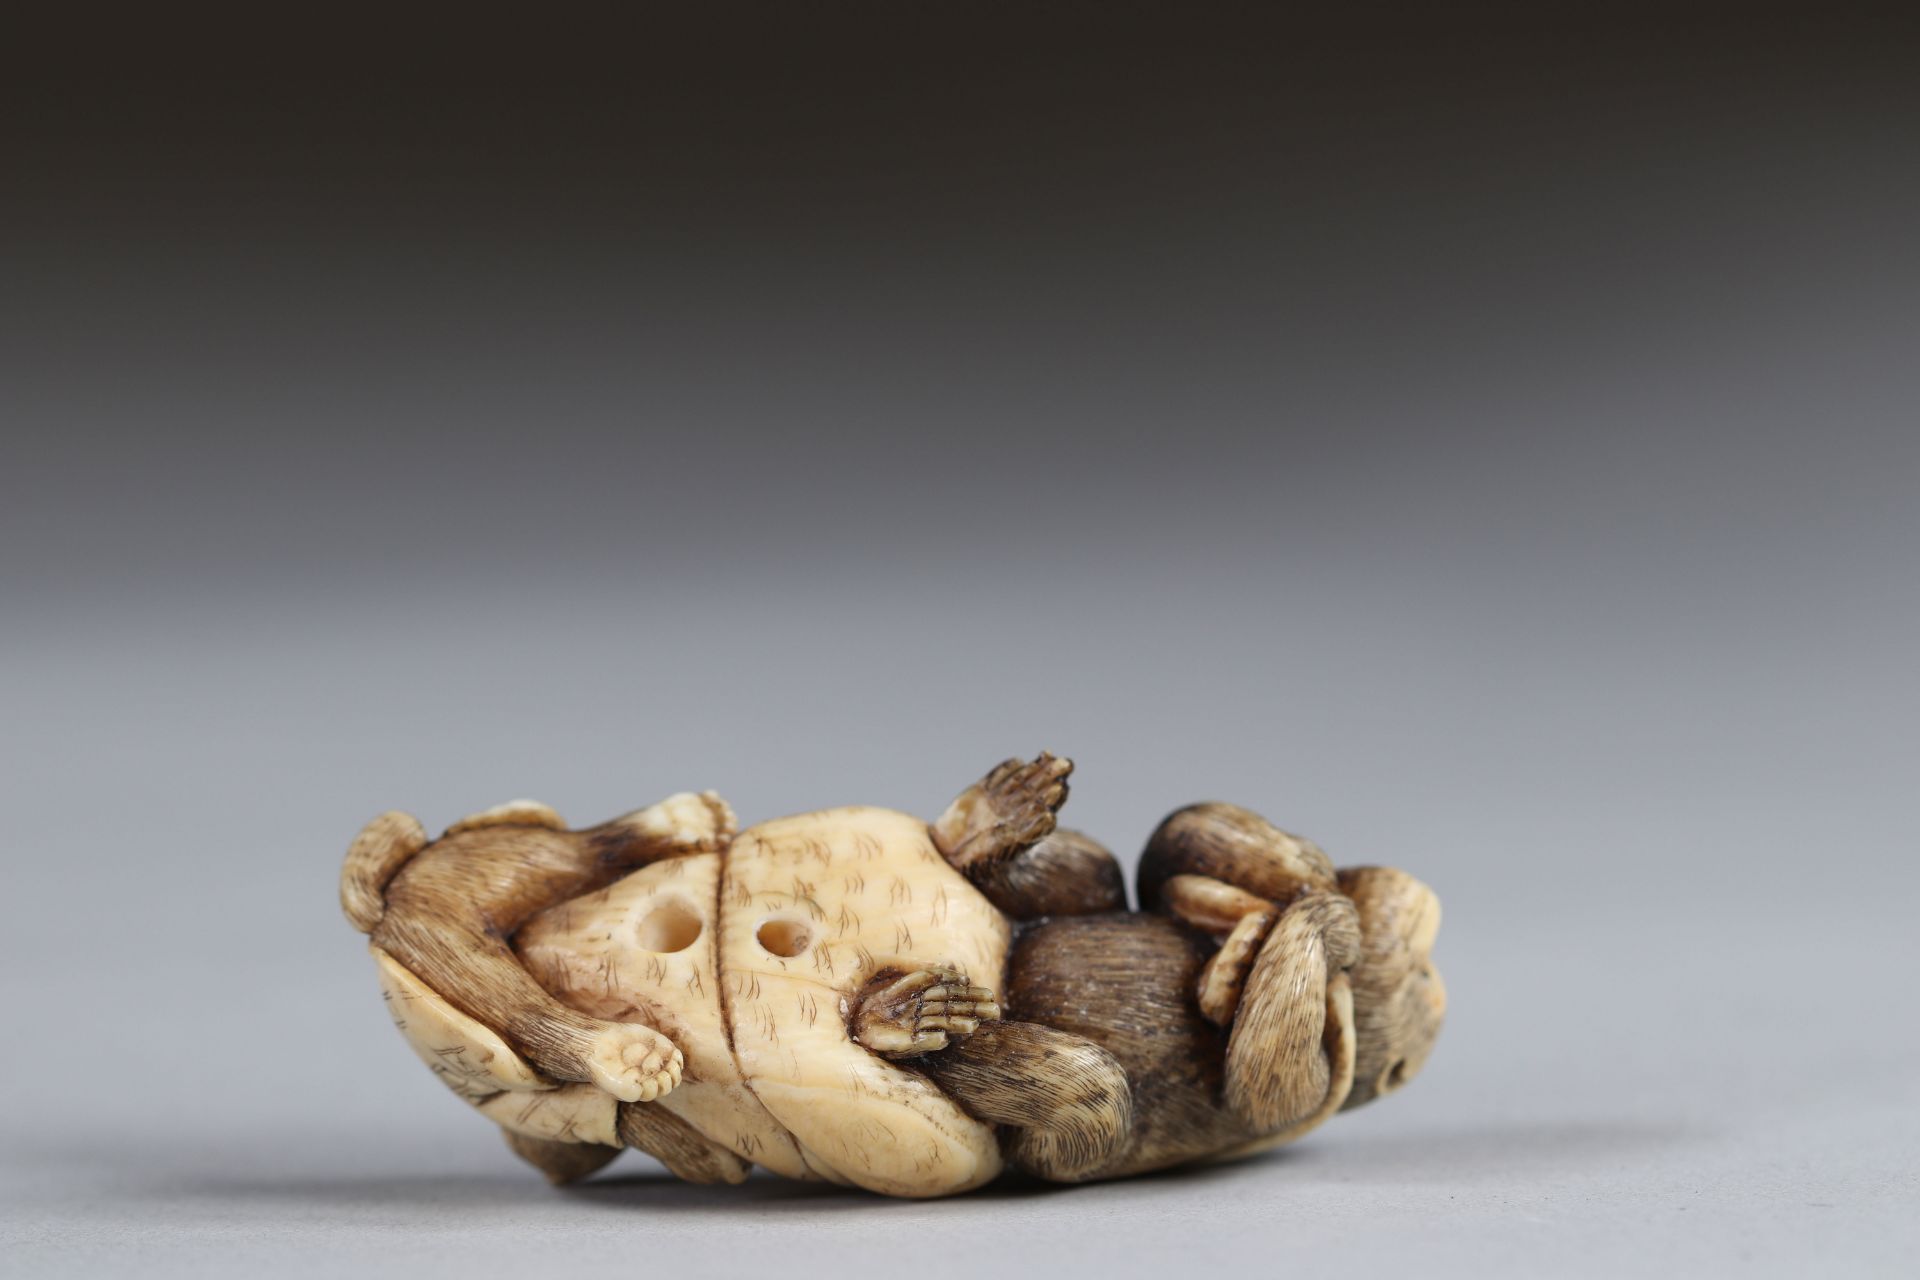 Netsuke carved - a monkey pulling a bag and a teddy bear. Japan Meiji period around 1900 - Image 4 of 4